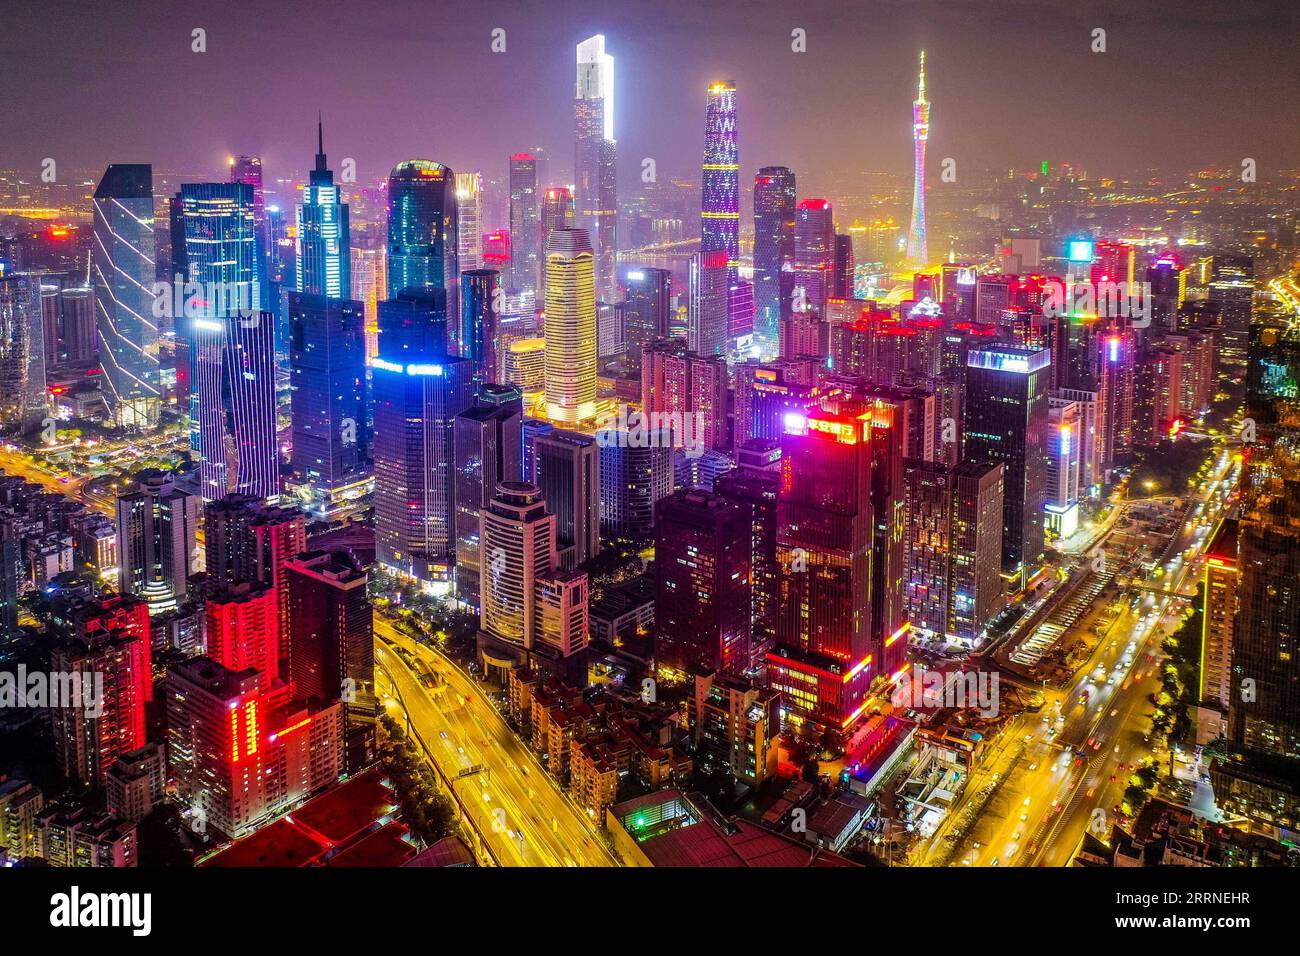 230107 -- BEIJING, Jan. 7, 2023 -- This aerial photo taken on Jan. 1, 2023 shows a night view of the commercial area around Tianhe Road in Guangzhou, south China s Guangdong Province.  Xinhua Headlines: Six fallacies and truths about China s epidemic control LiuxDawei PUBLICATIONxNOTxINxCHN Stock Photo